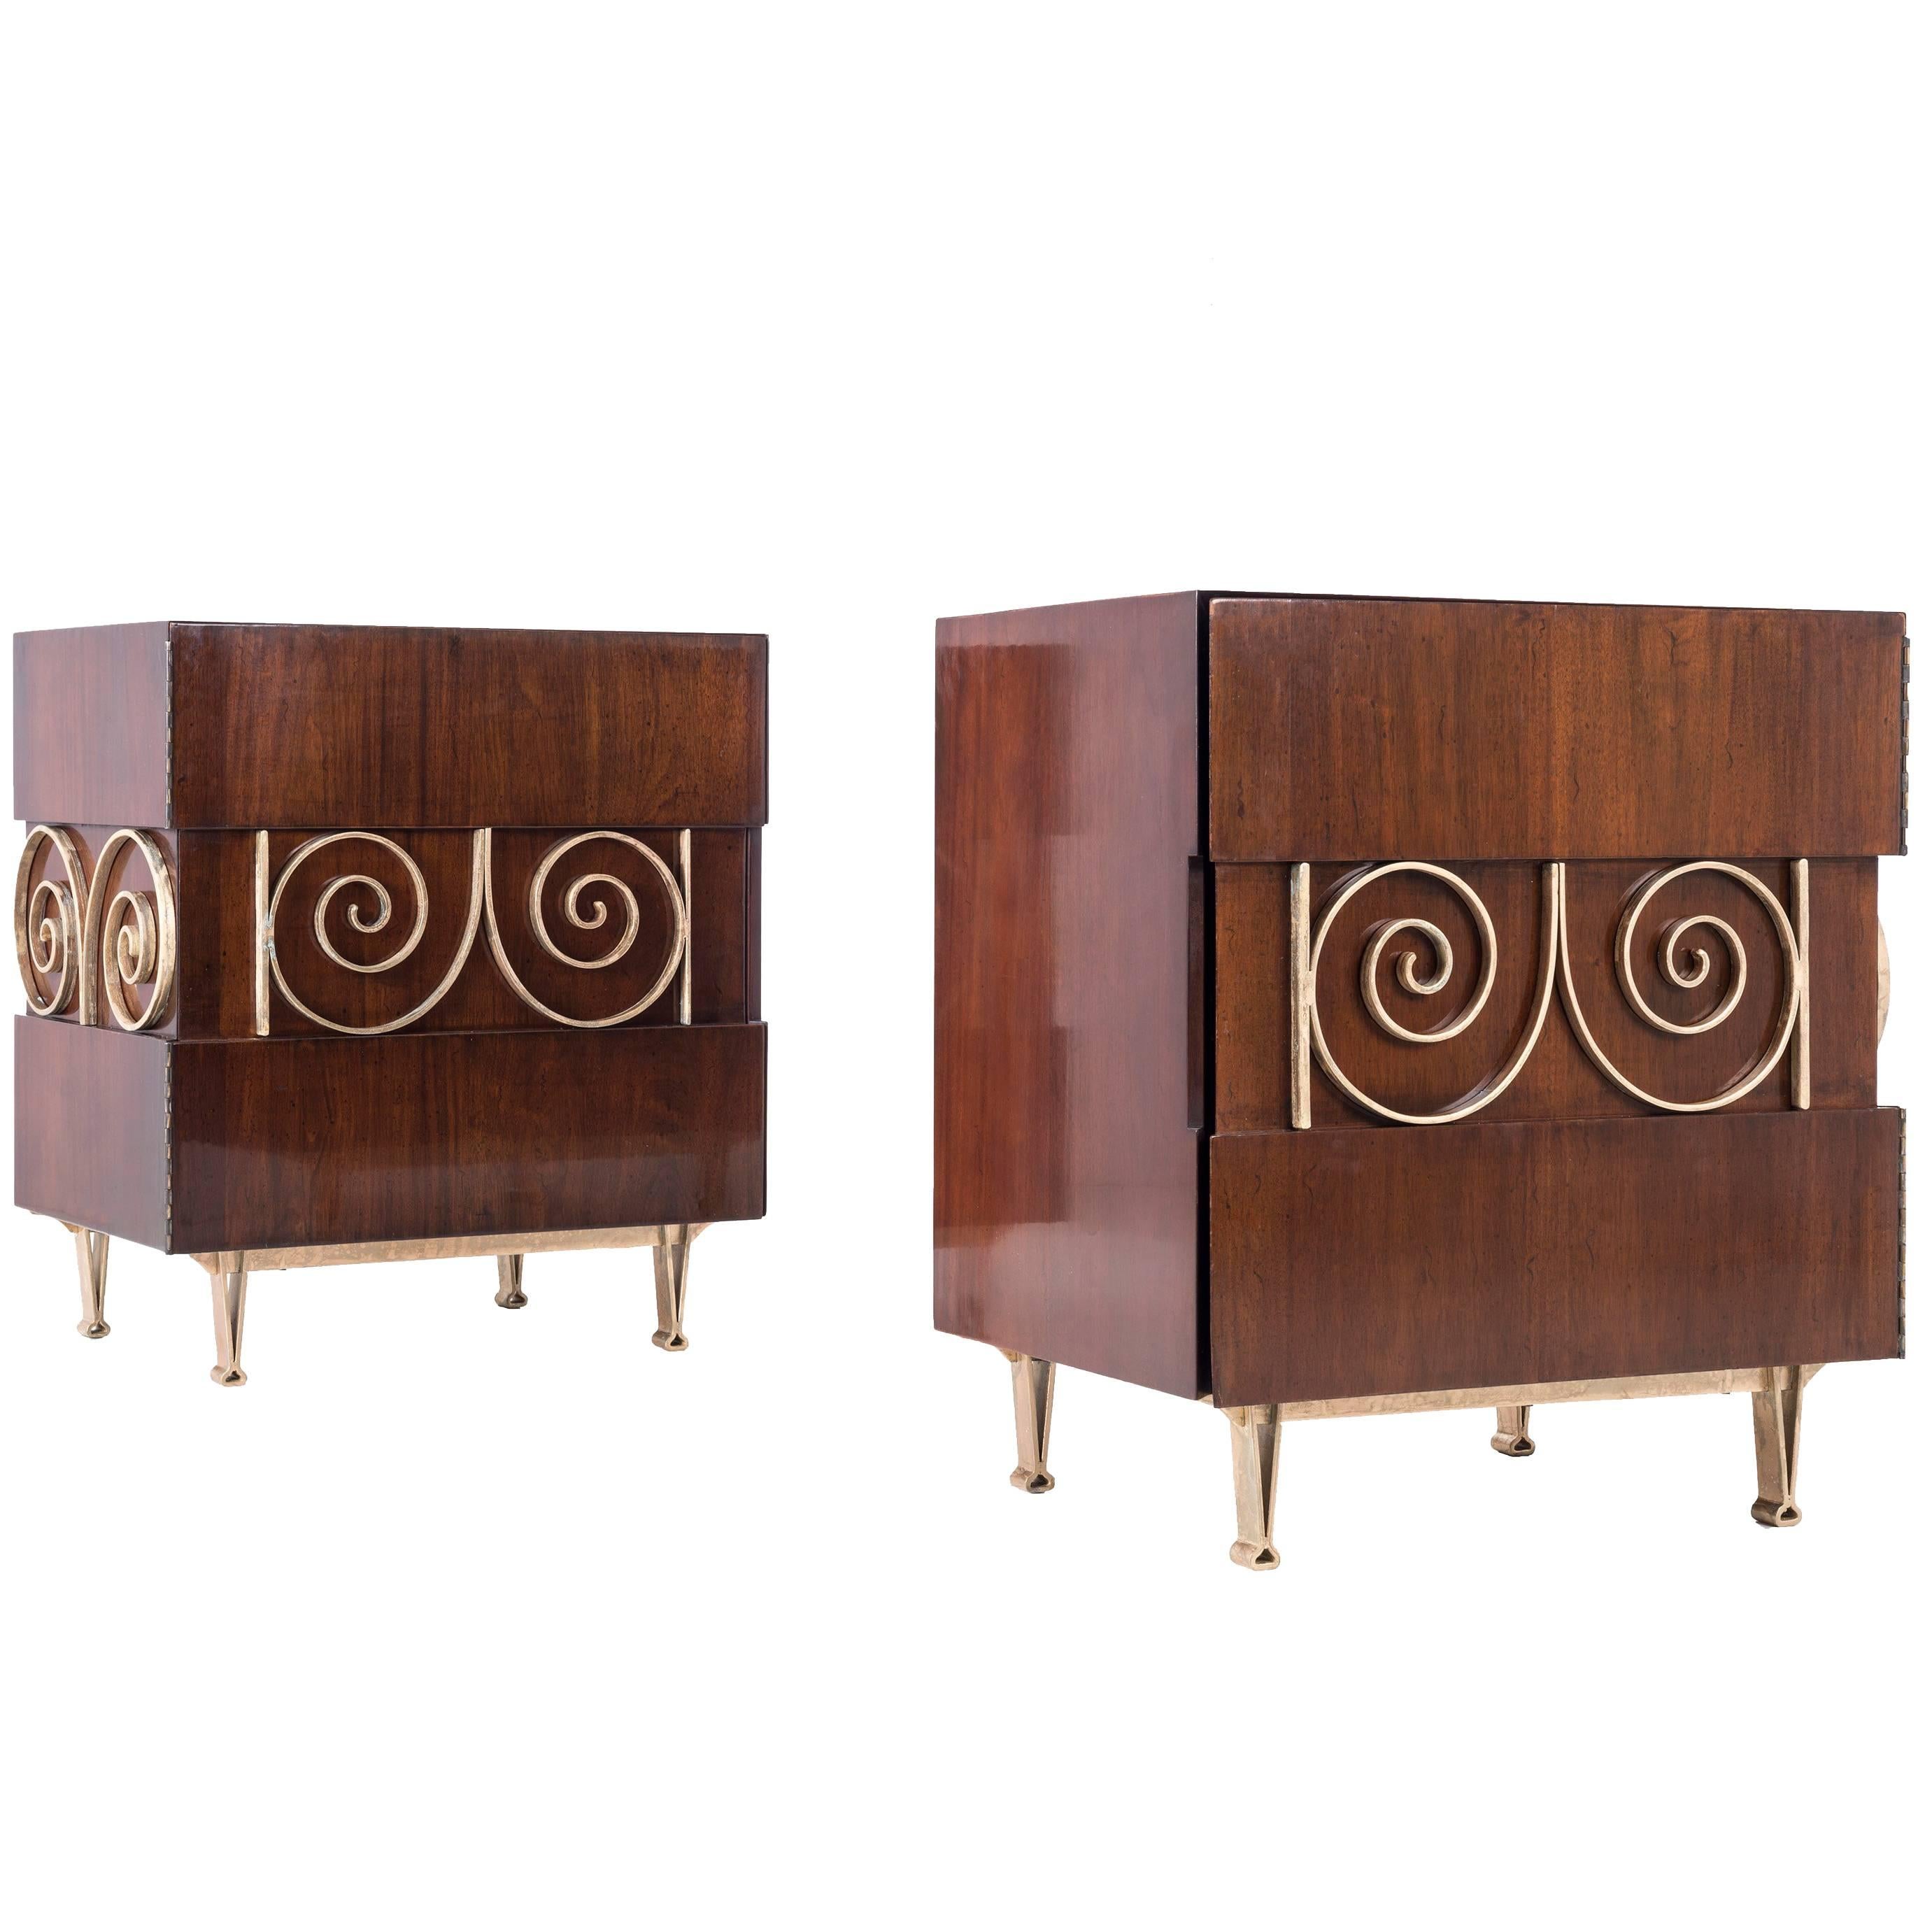 Edmund Spence Pair of End Tables or Nightstands